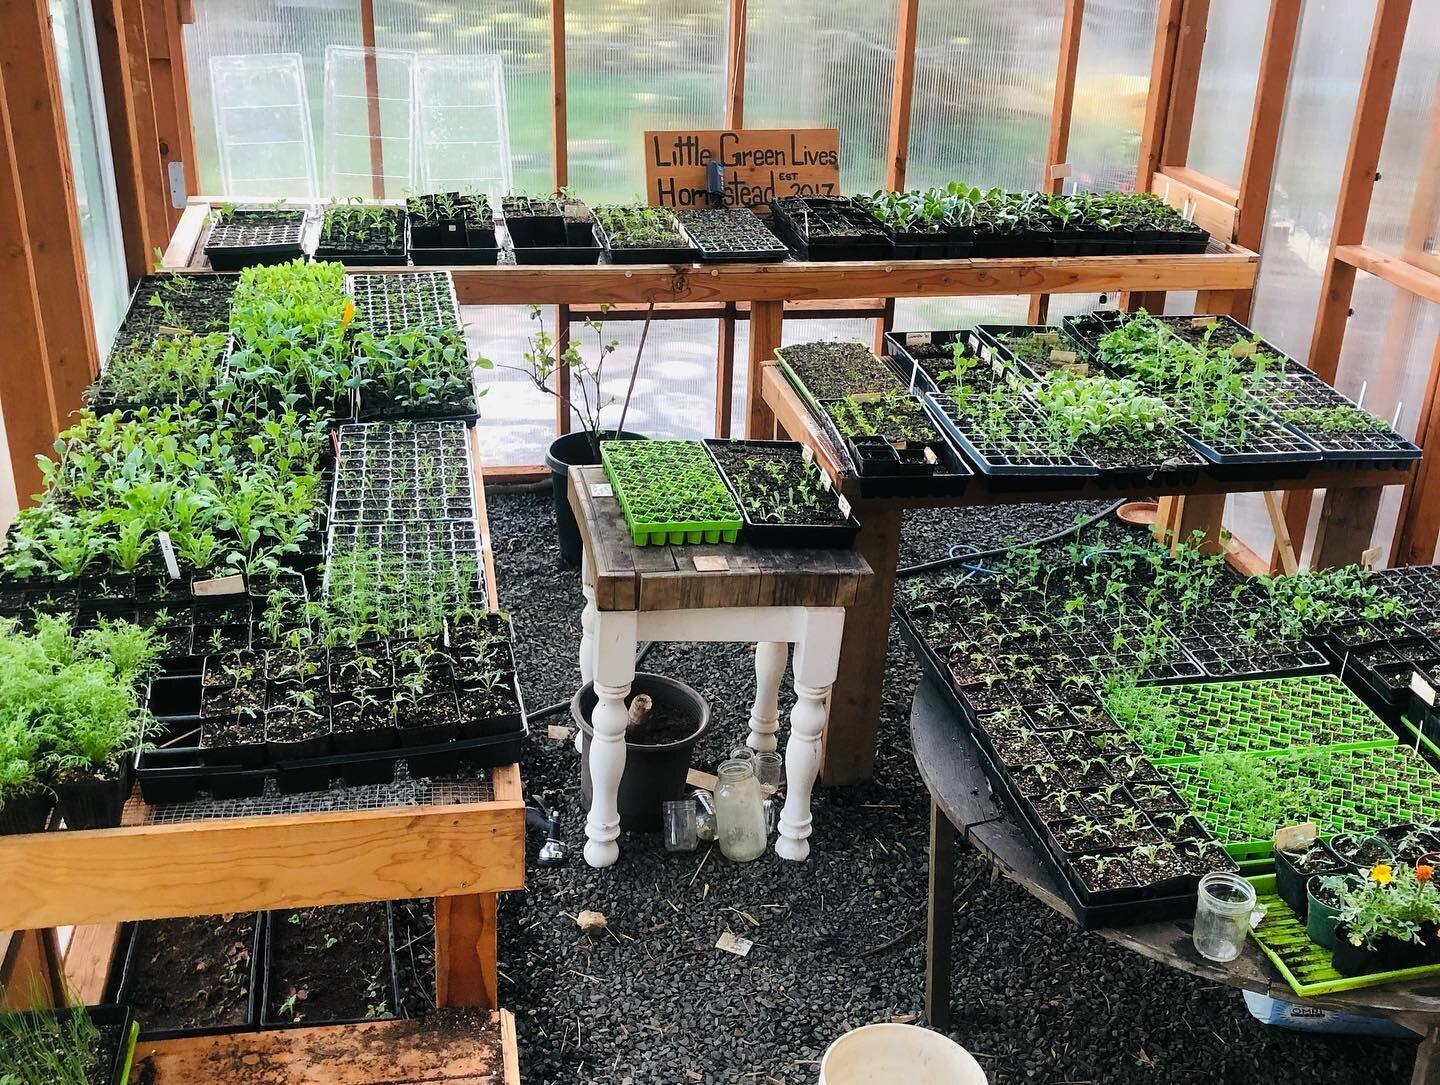 It&rsquo;s a busy life but a happy one! ❤️🌱☺️
.

The greenhouse is bursting with plant babies patiently awaiting their graduation day to the veggie gardens. Every time I&rsquo;m in there I swear they are all shouting &lsquo;pick me, pick me&rsquo;. 